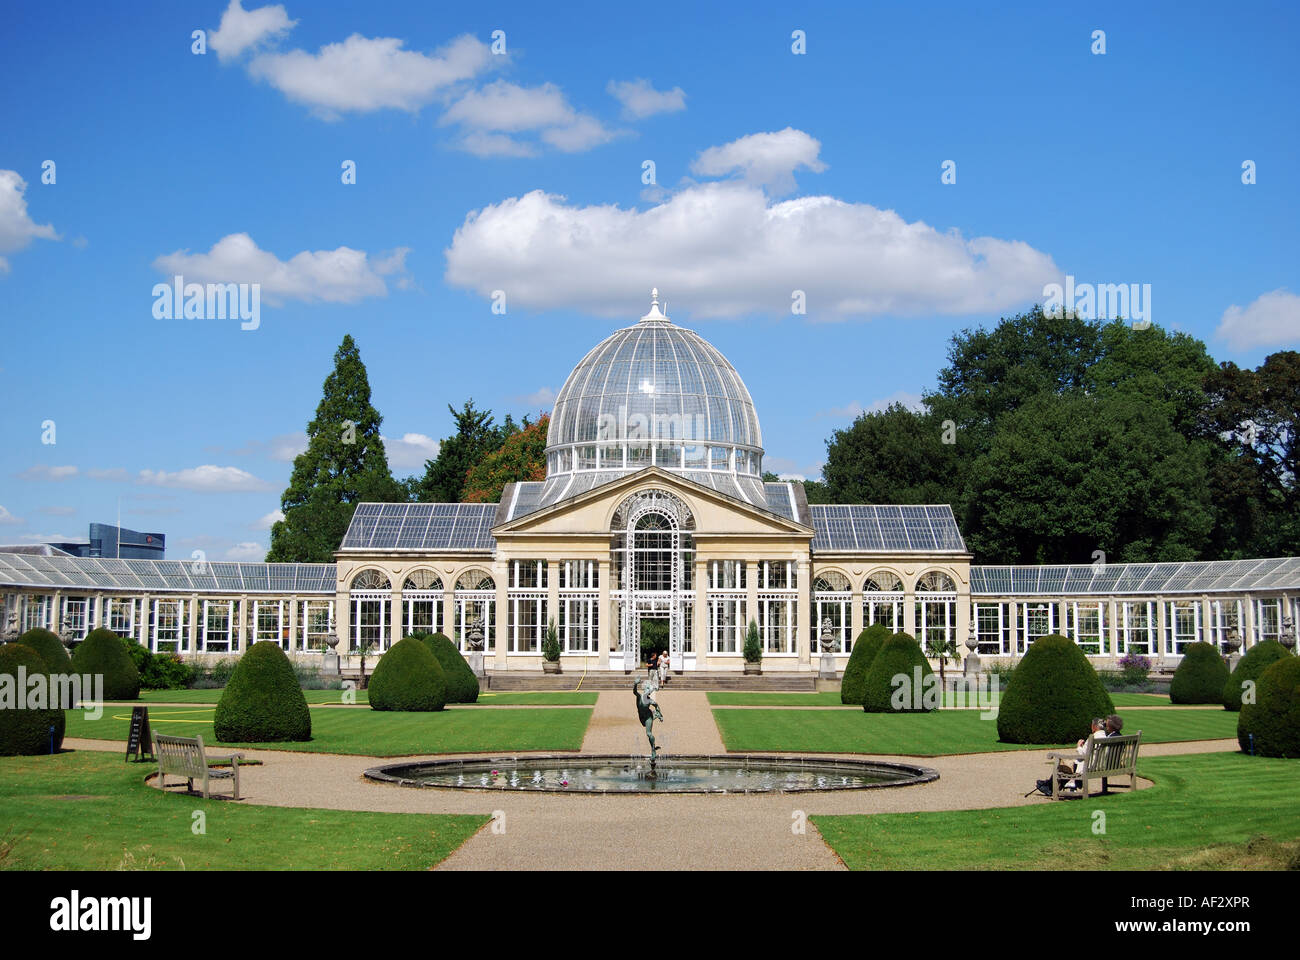 The Great Conservatory and Gardens, Syon House, Brentford, London Borough of Hounslow, Greater London, England, Regno Unito Foto Stock